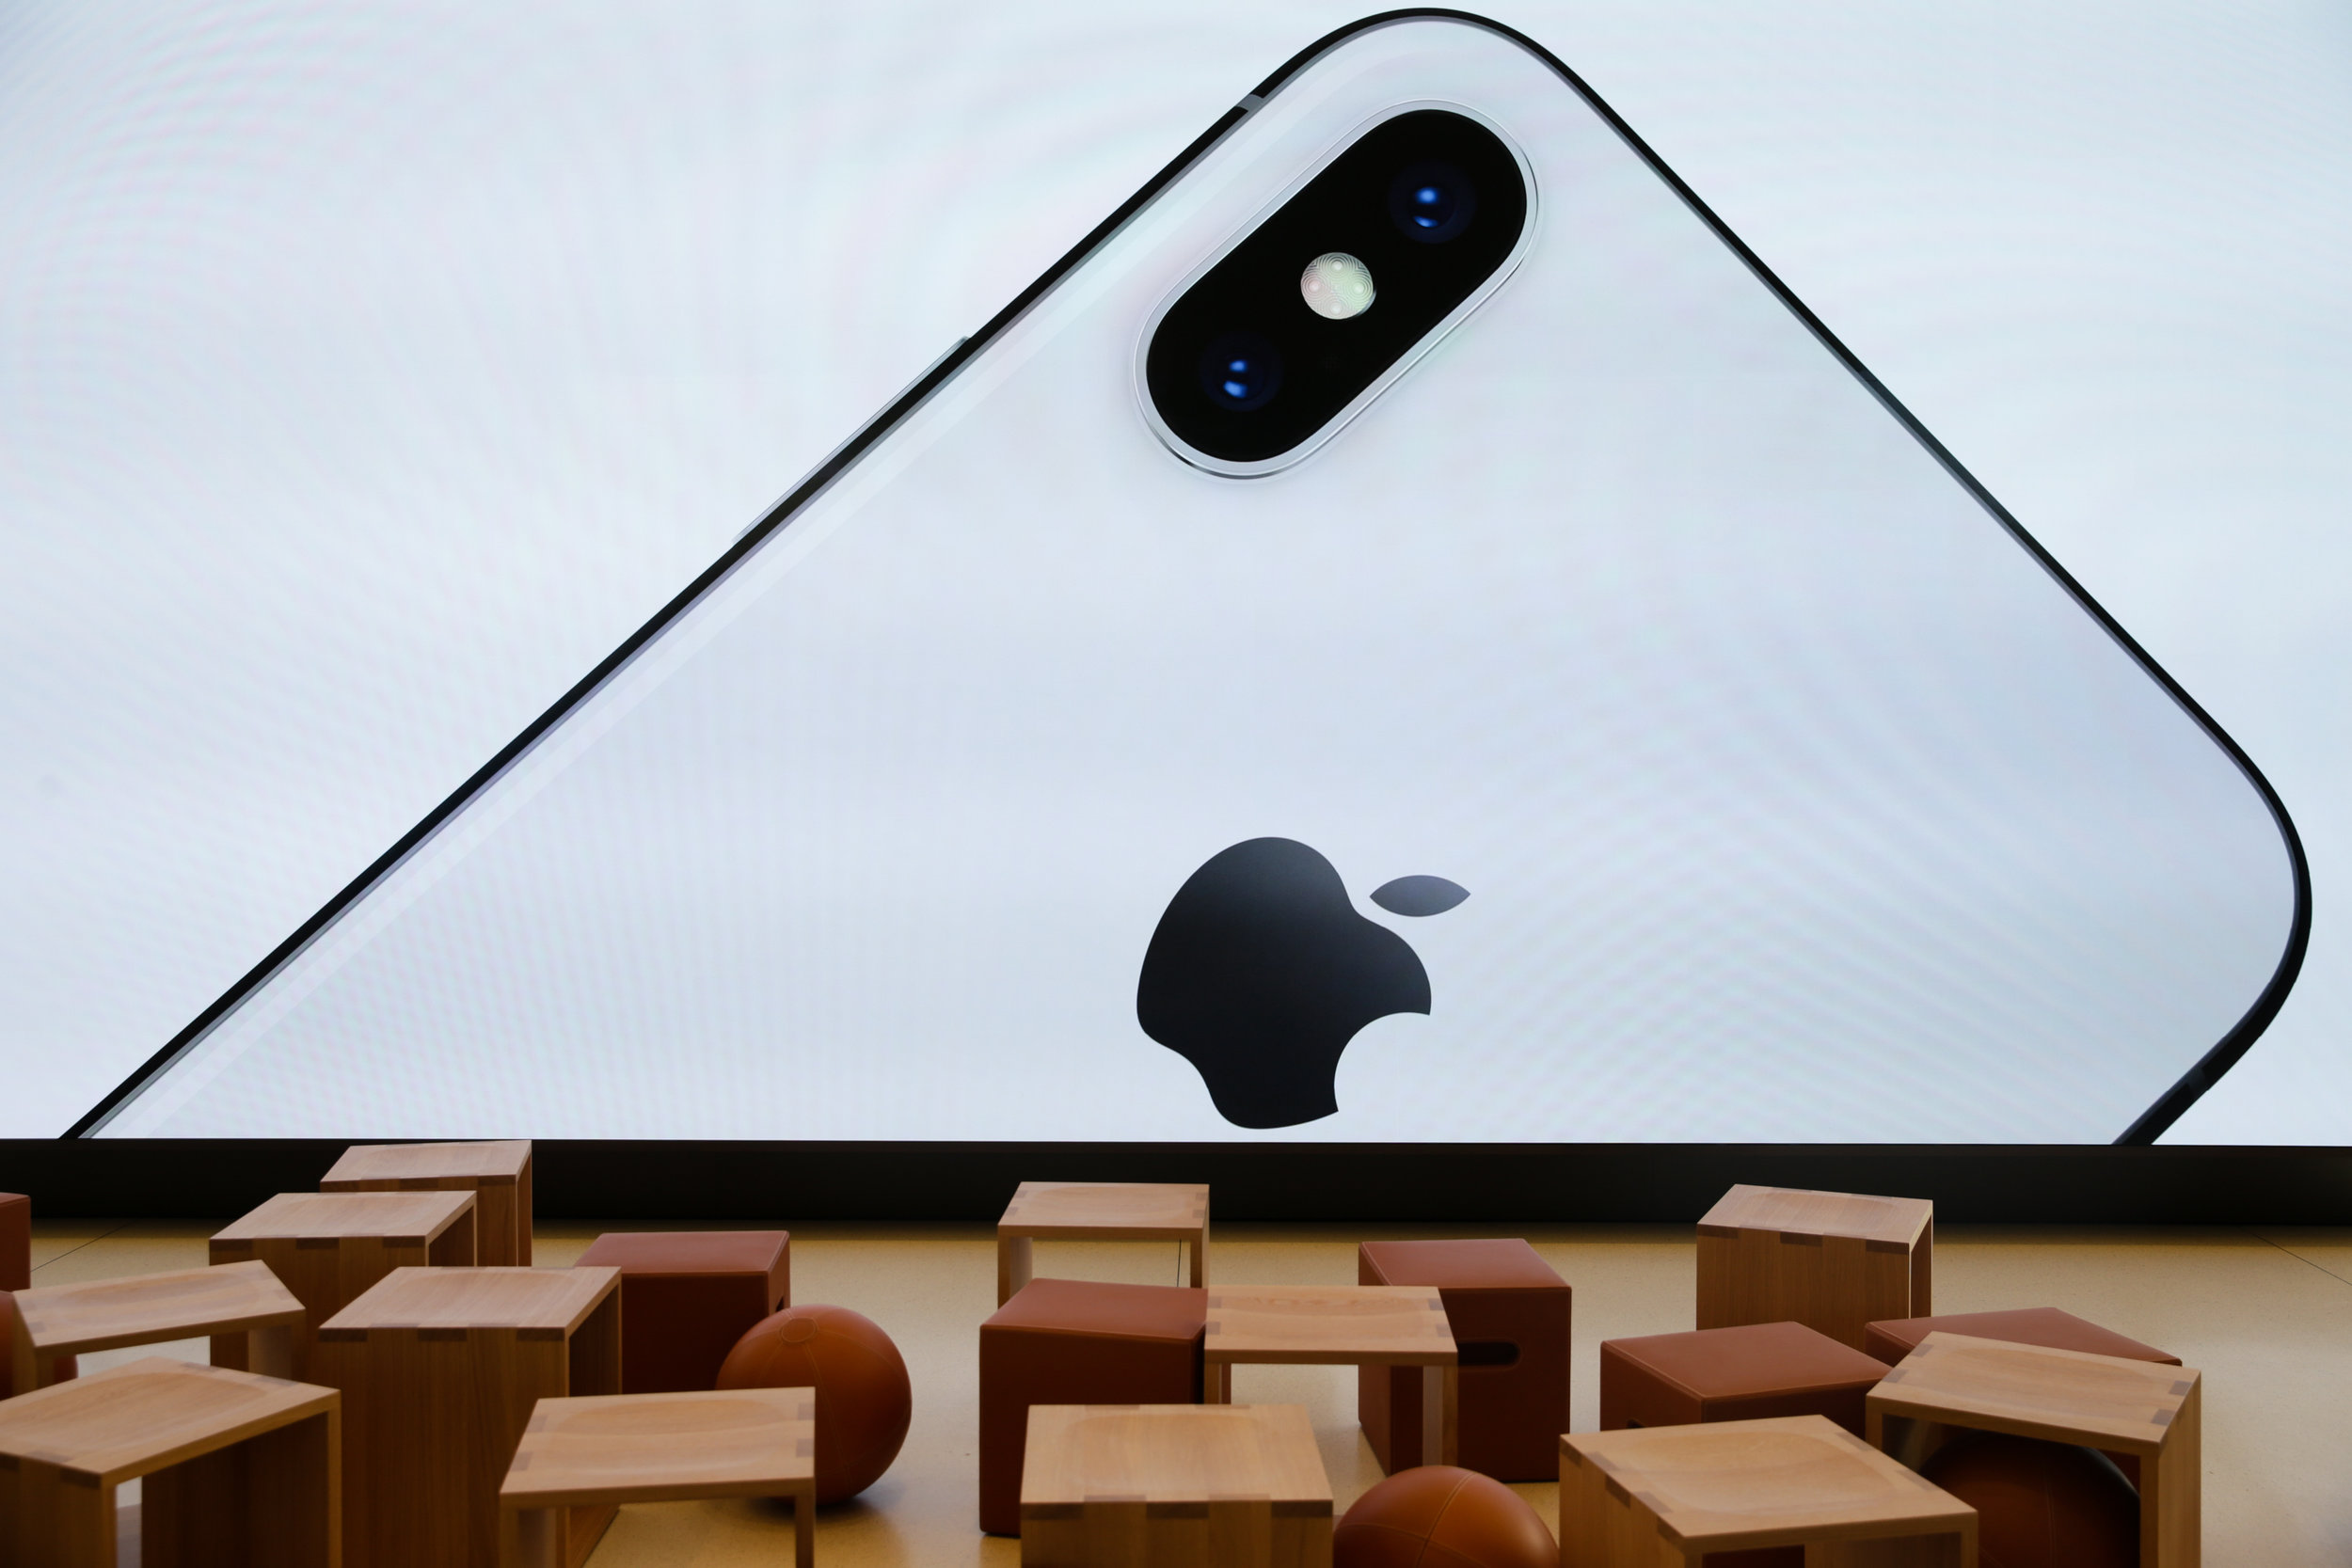  A large screen displays an image of the iPhone X at the Apple Park Visitor Center in Cupertino, California 